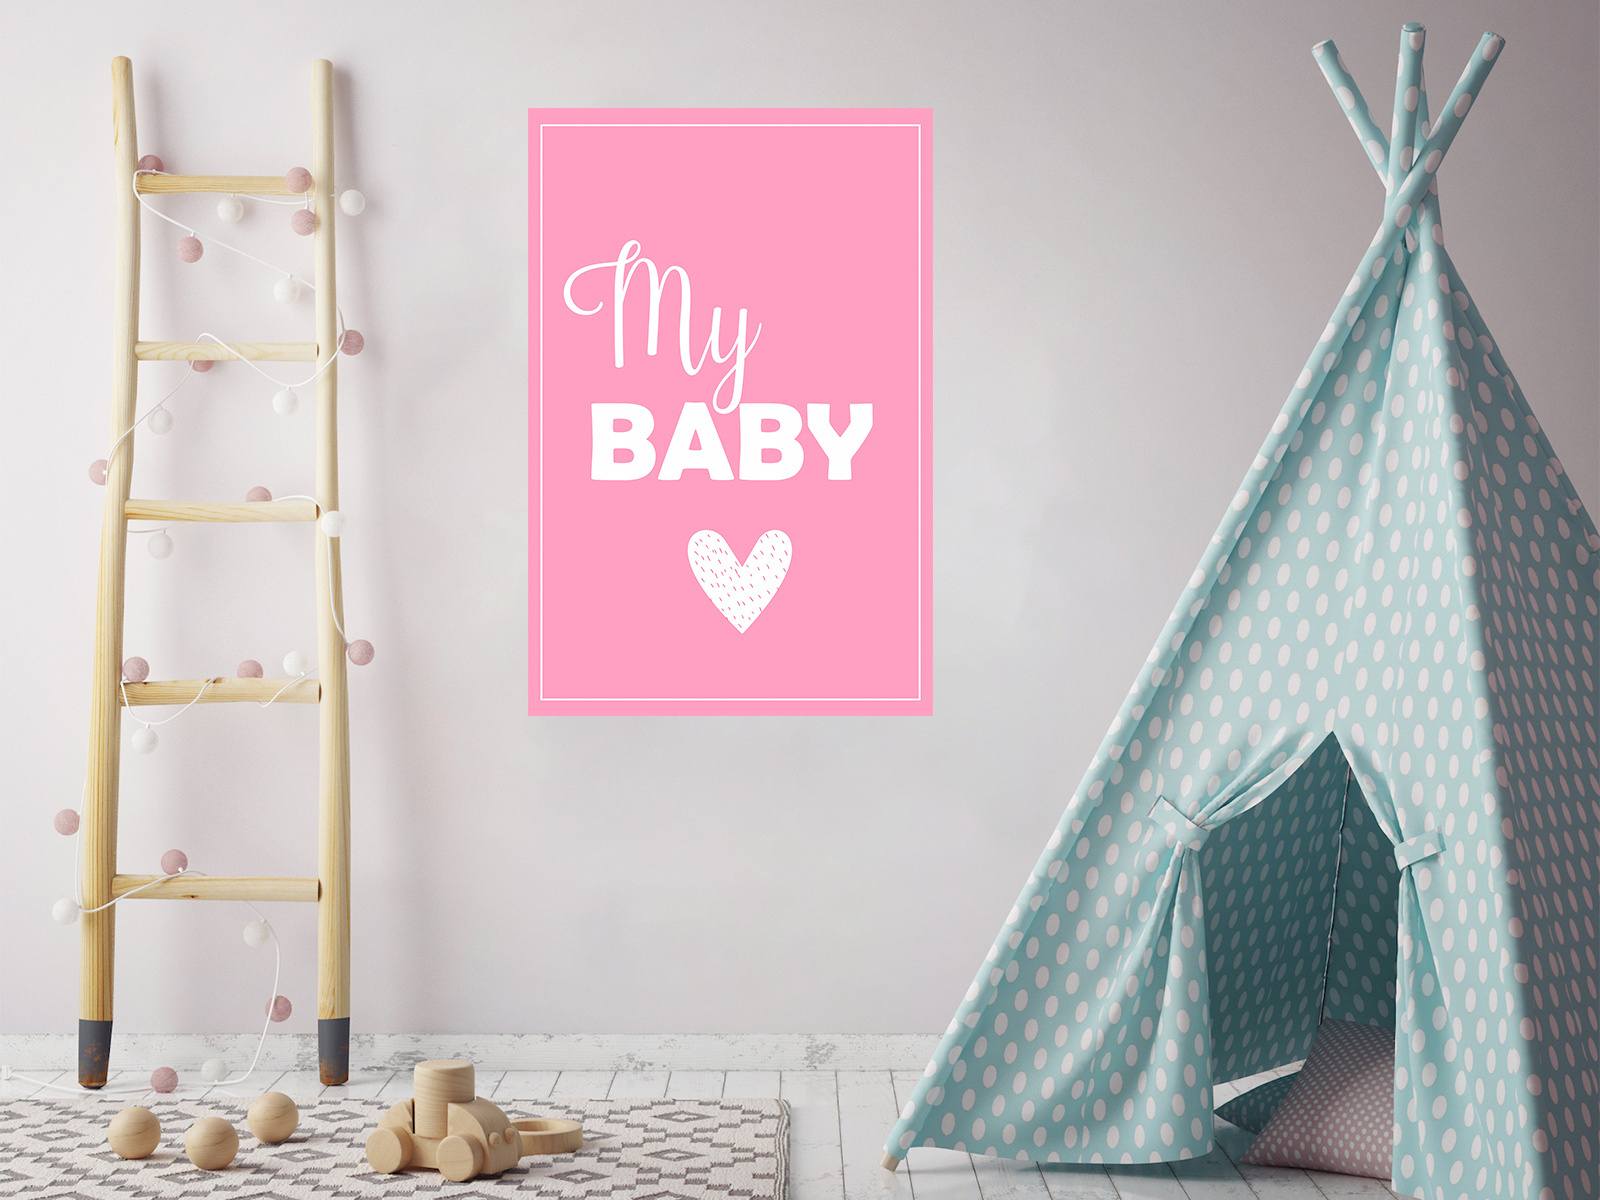 Awkward Styles My Baby Poster Wall Art Kids Room Wall Decor Pink Poster Baby Room Decor Gifts for Kids Baby Girl's Room Printed Art Picture Mother Quotes Decor Girls Play Room Wall Decor Pink Poster - image 2 of 3